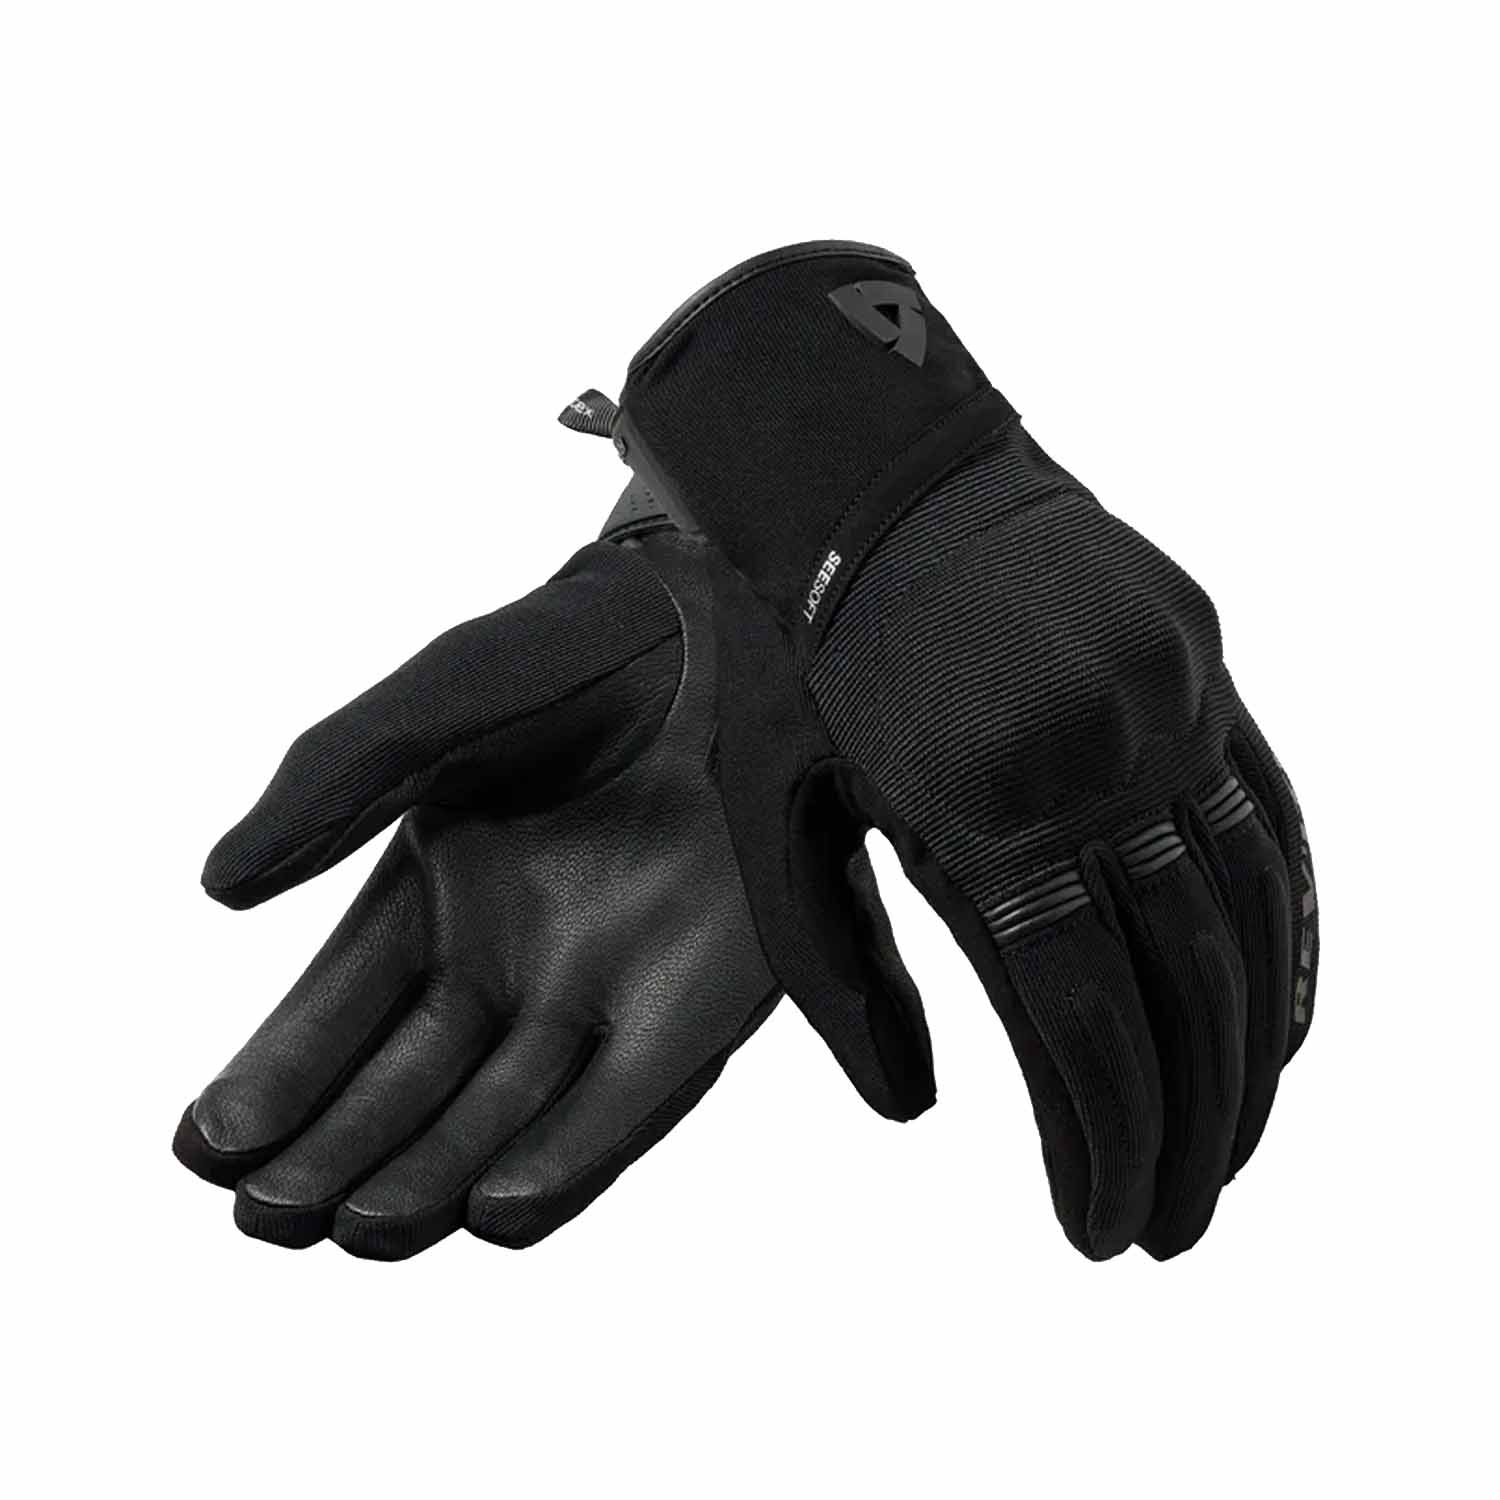 Image of EU REV'IT! Mosca 2 H2O Gloves Ladies Black Taille M